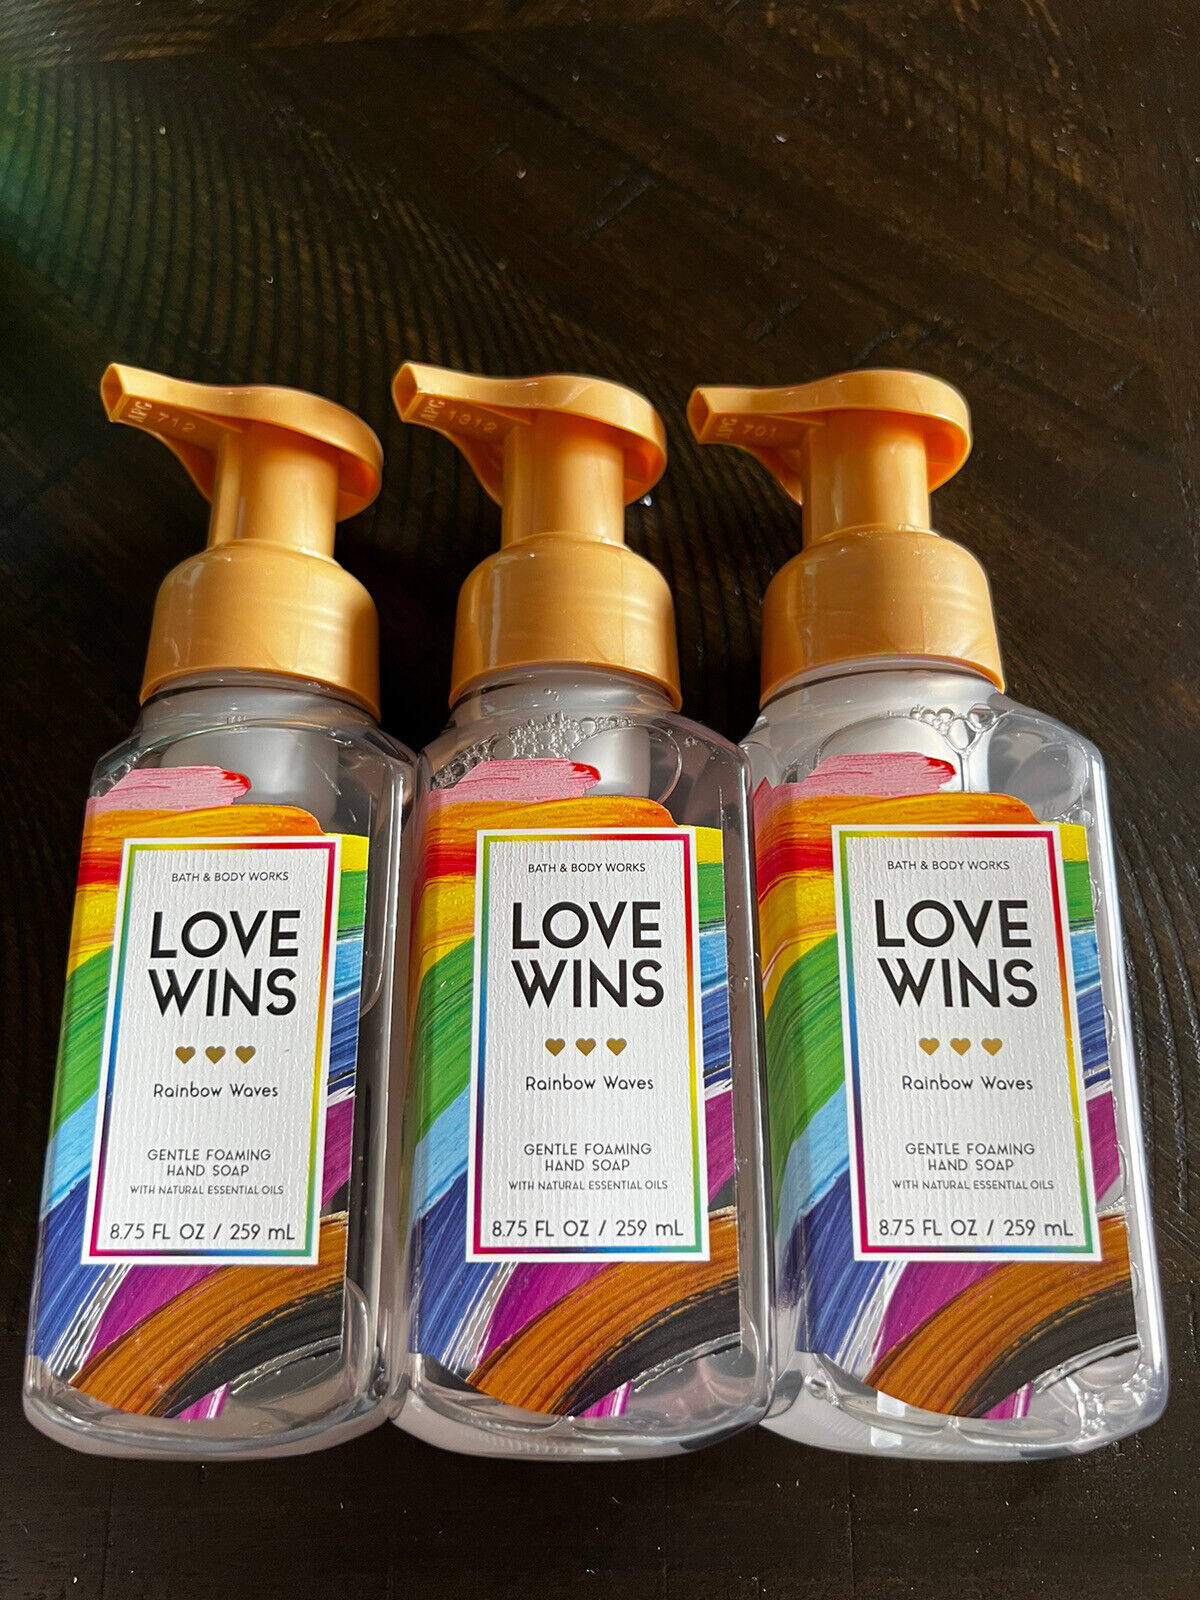 3 Bath And Body Works Love Wins Gentle Foaming Hand Soap.